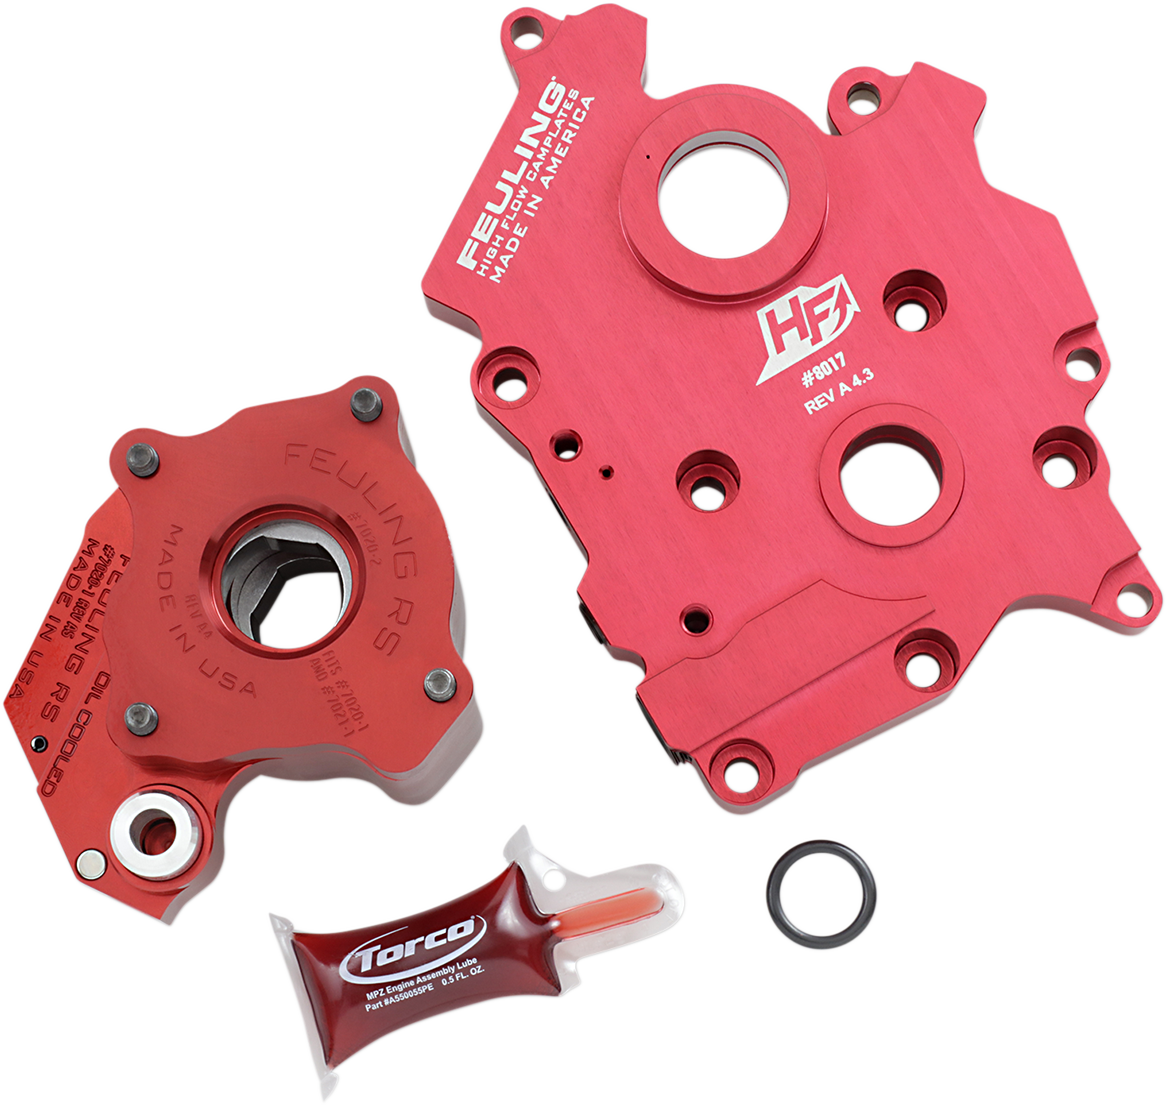 Feuling Race Oil Pump & Cam Plate Kit 2017-2020 Harley Softail Touring Models